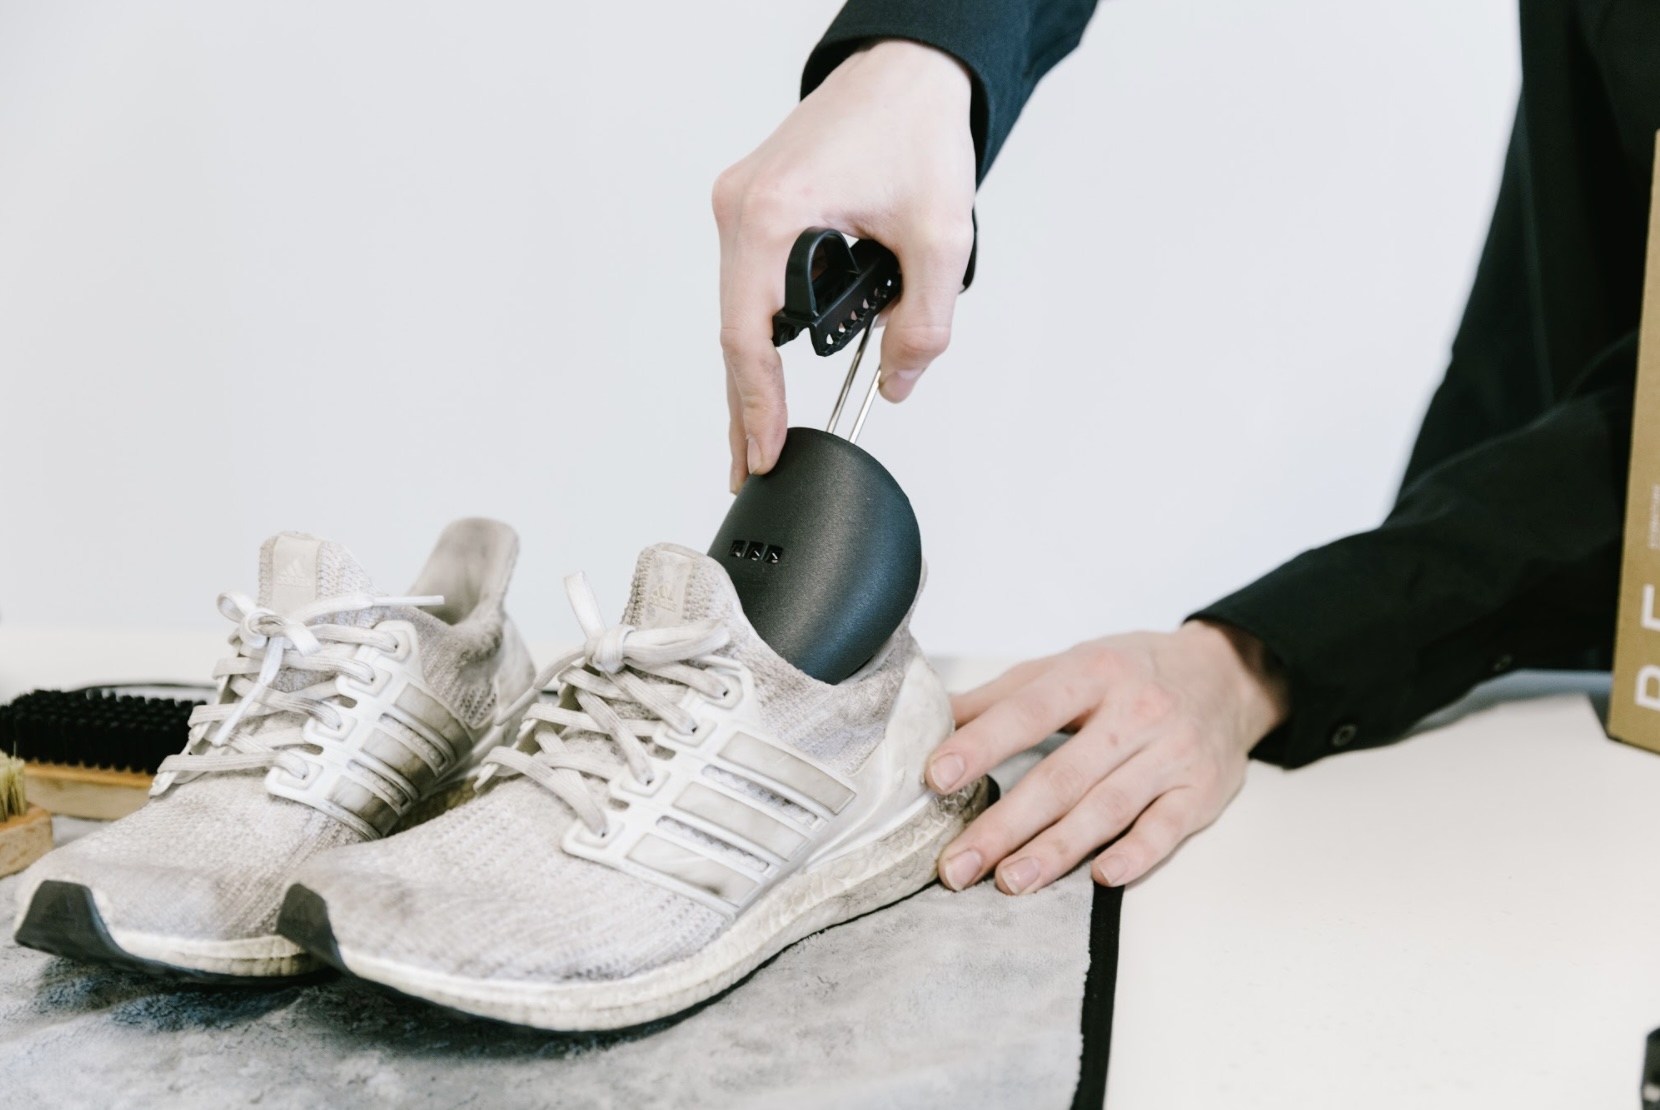 How To Wash Ultraboost In A Washing Machine